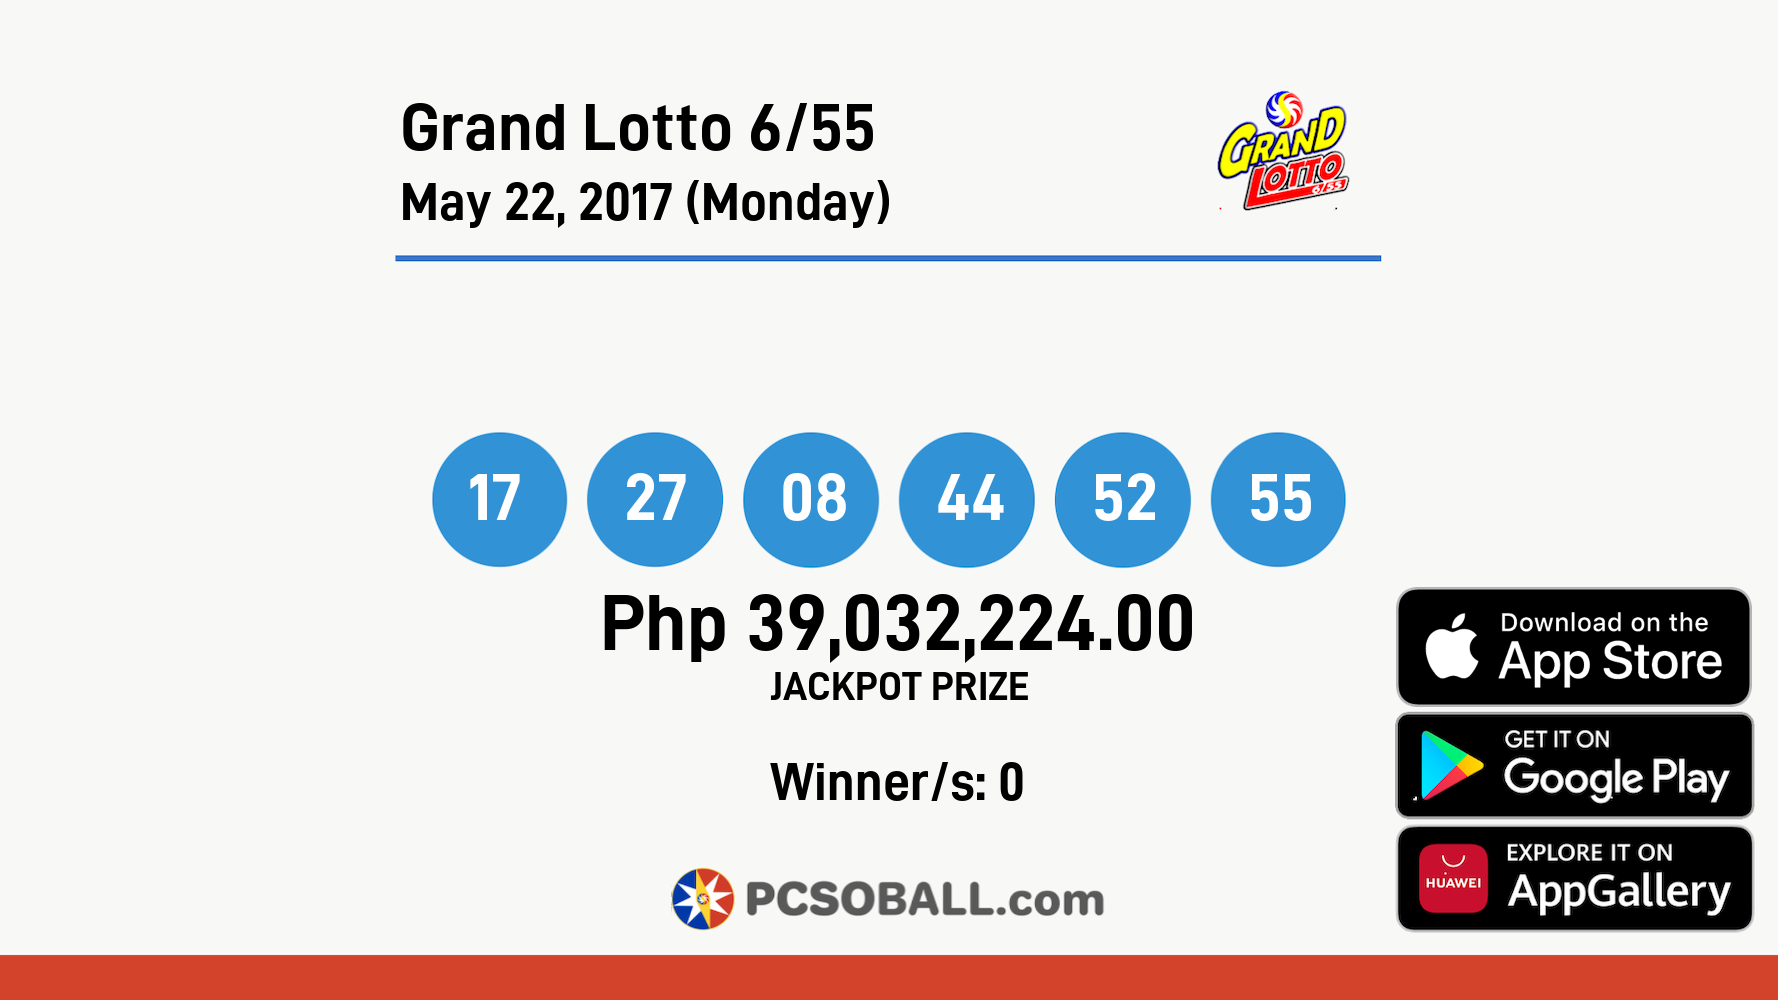 Grand Lotto 6/55 May 22, 2017 (Monday) Result